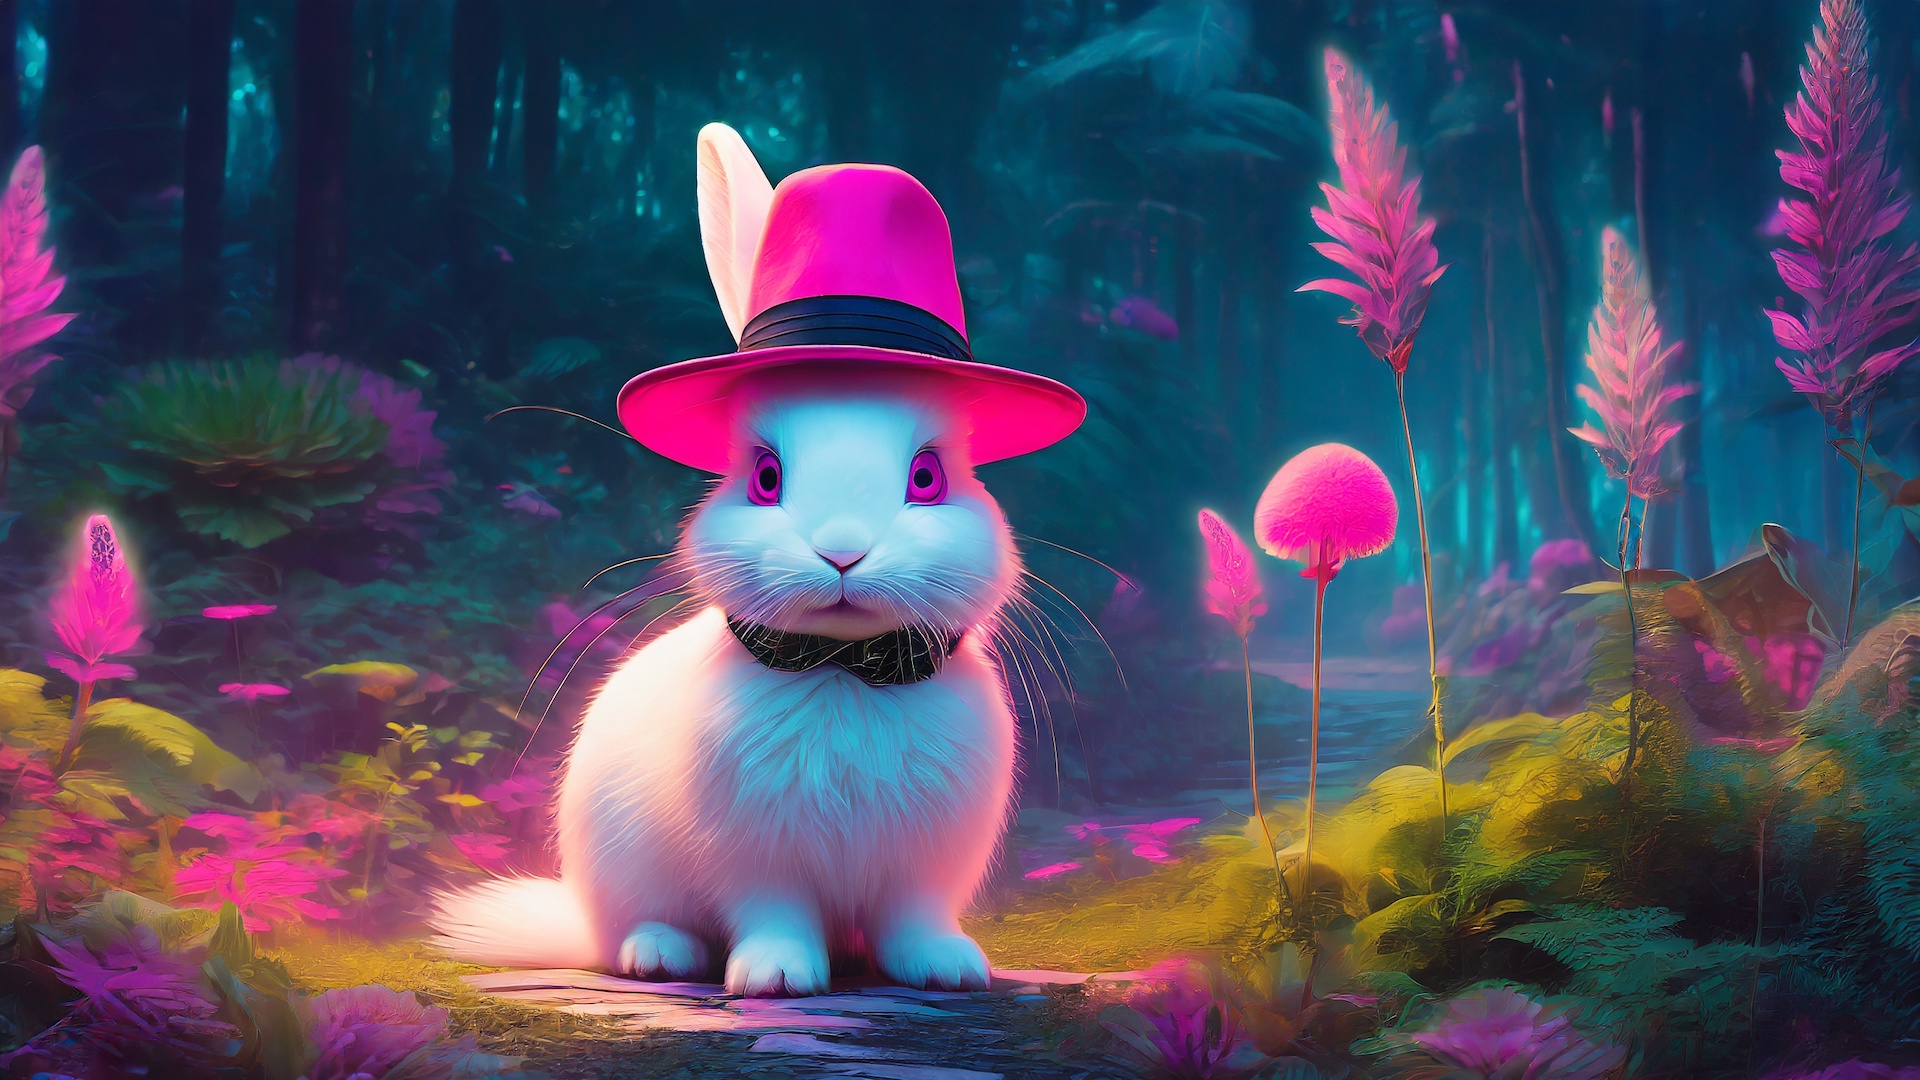 White rabbit with pink hat